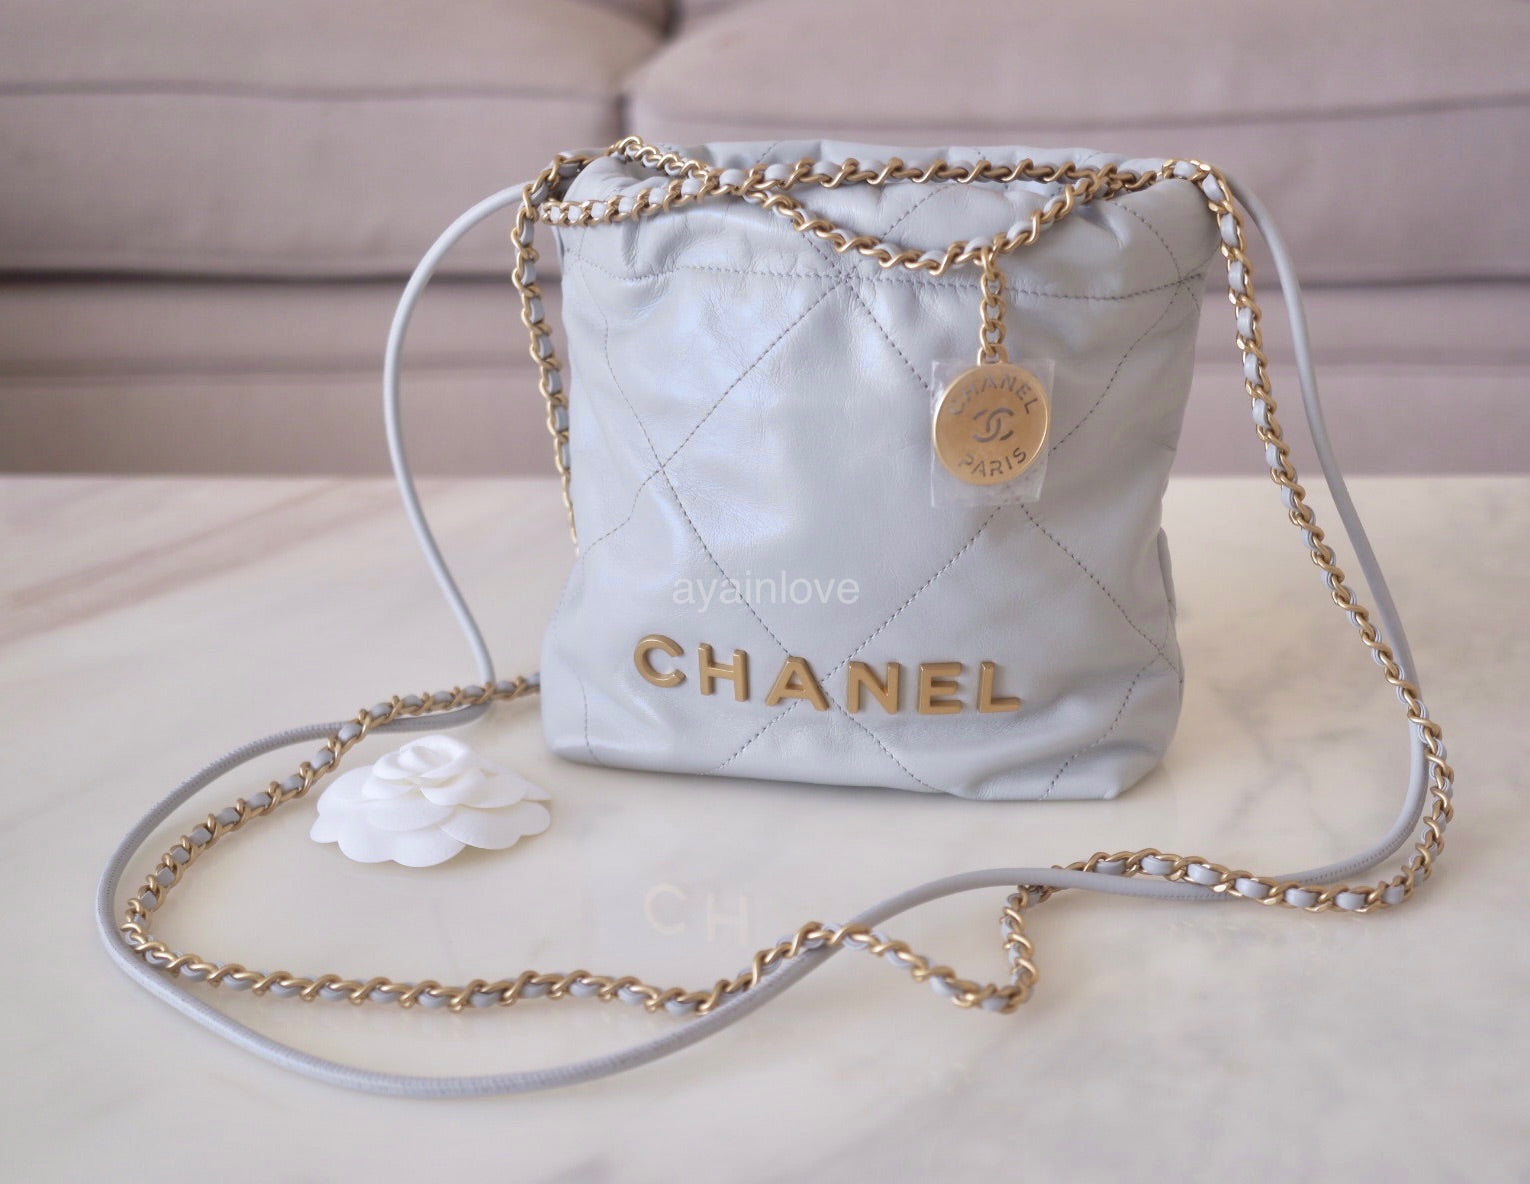 Pre-owned Chanel Light Blue Leather Cc Cosmetic Pouch